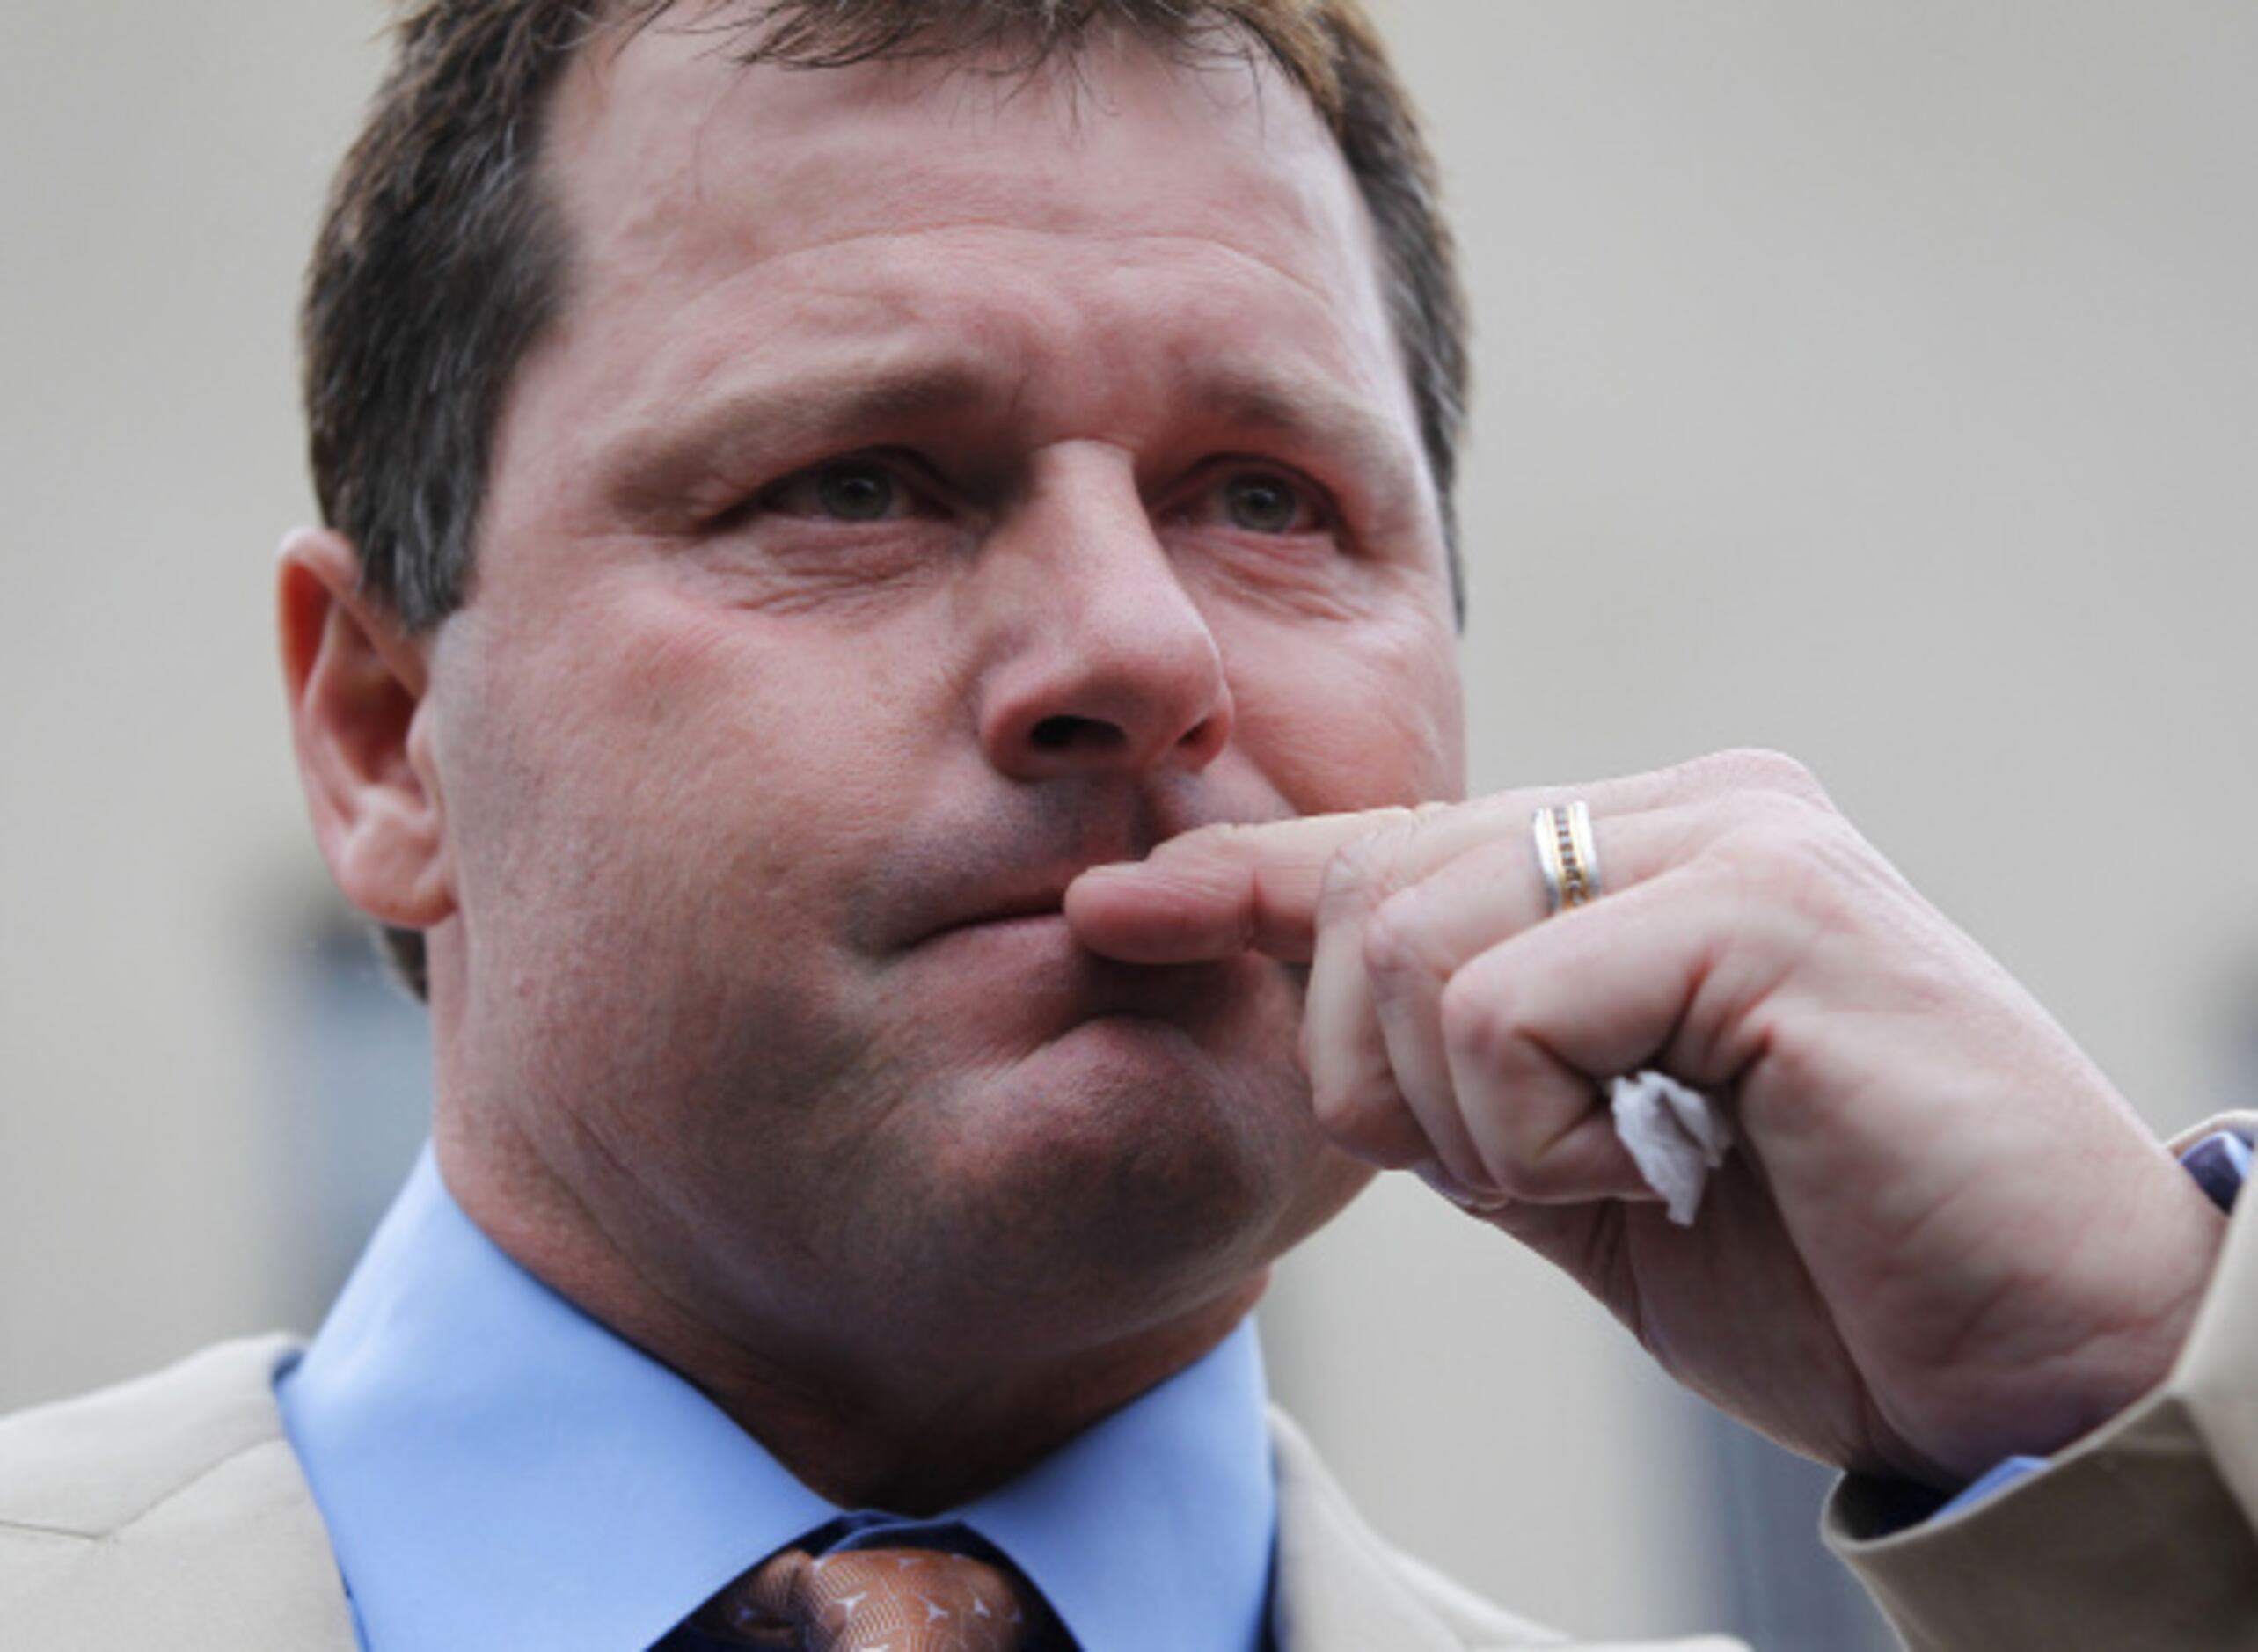 Baseball great Roger Clemens found not guilty of perjury